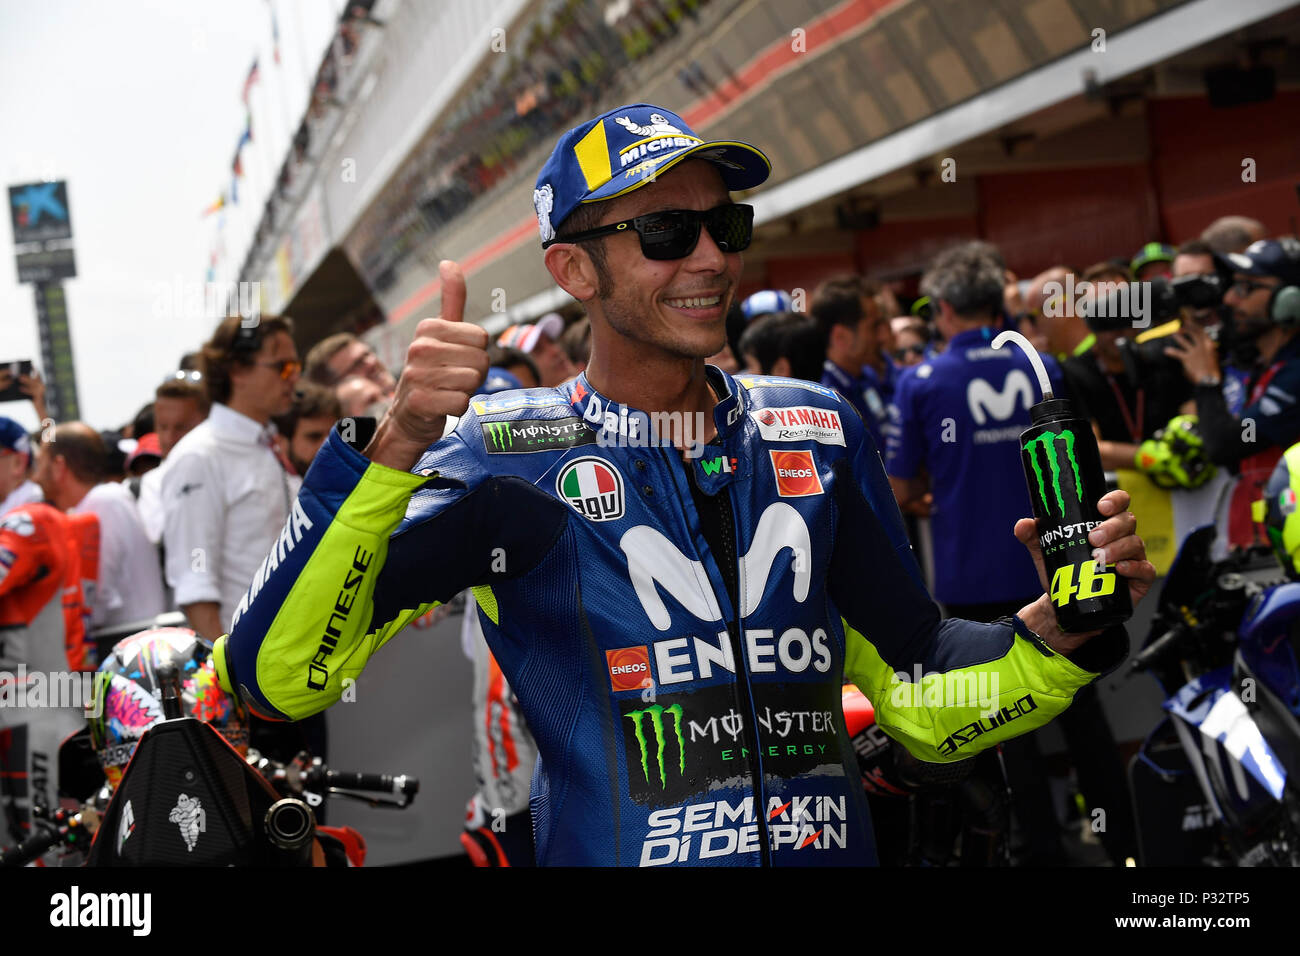 Barcelona, Spain, 17 June 2018. Valentino Rossi (46) of Italy and  Movistar Yamaha MotoGP during the race day of the Gran Premi Monster Energy de Catalunya, Circuit of Catalunya, Montmelo, Spain. 17th June of 2018. Credit: CORDON PRESS/Alamy Live News Stock Photo